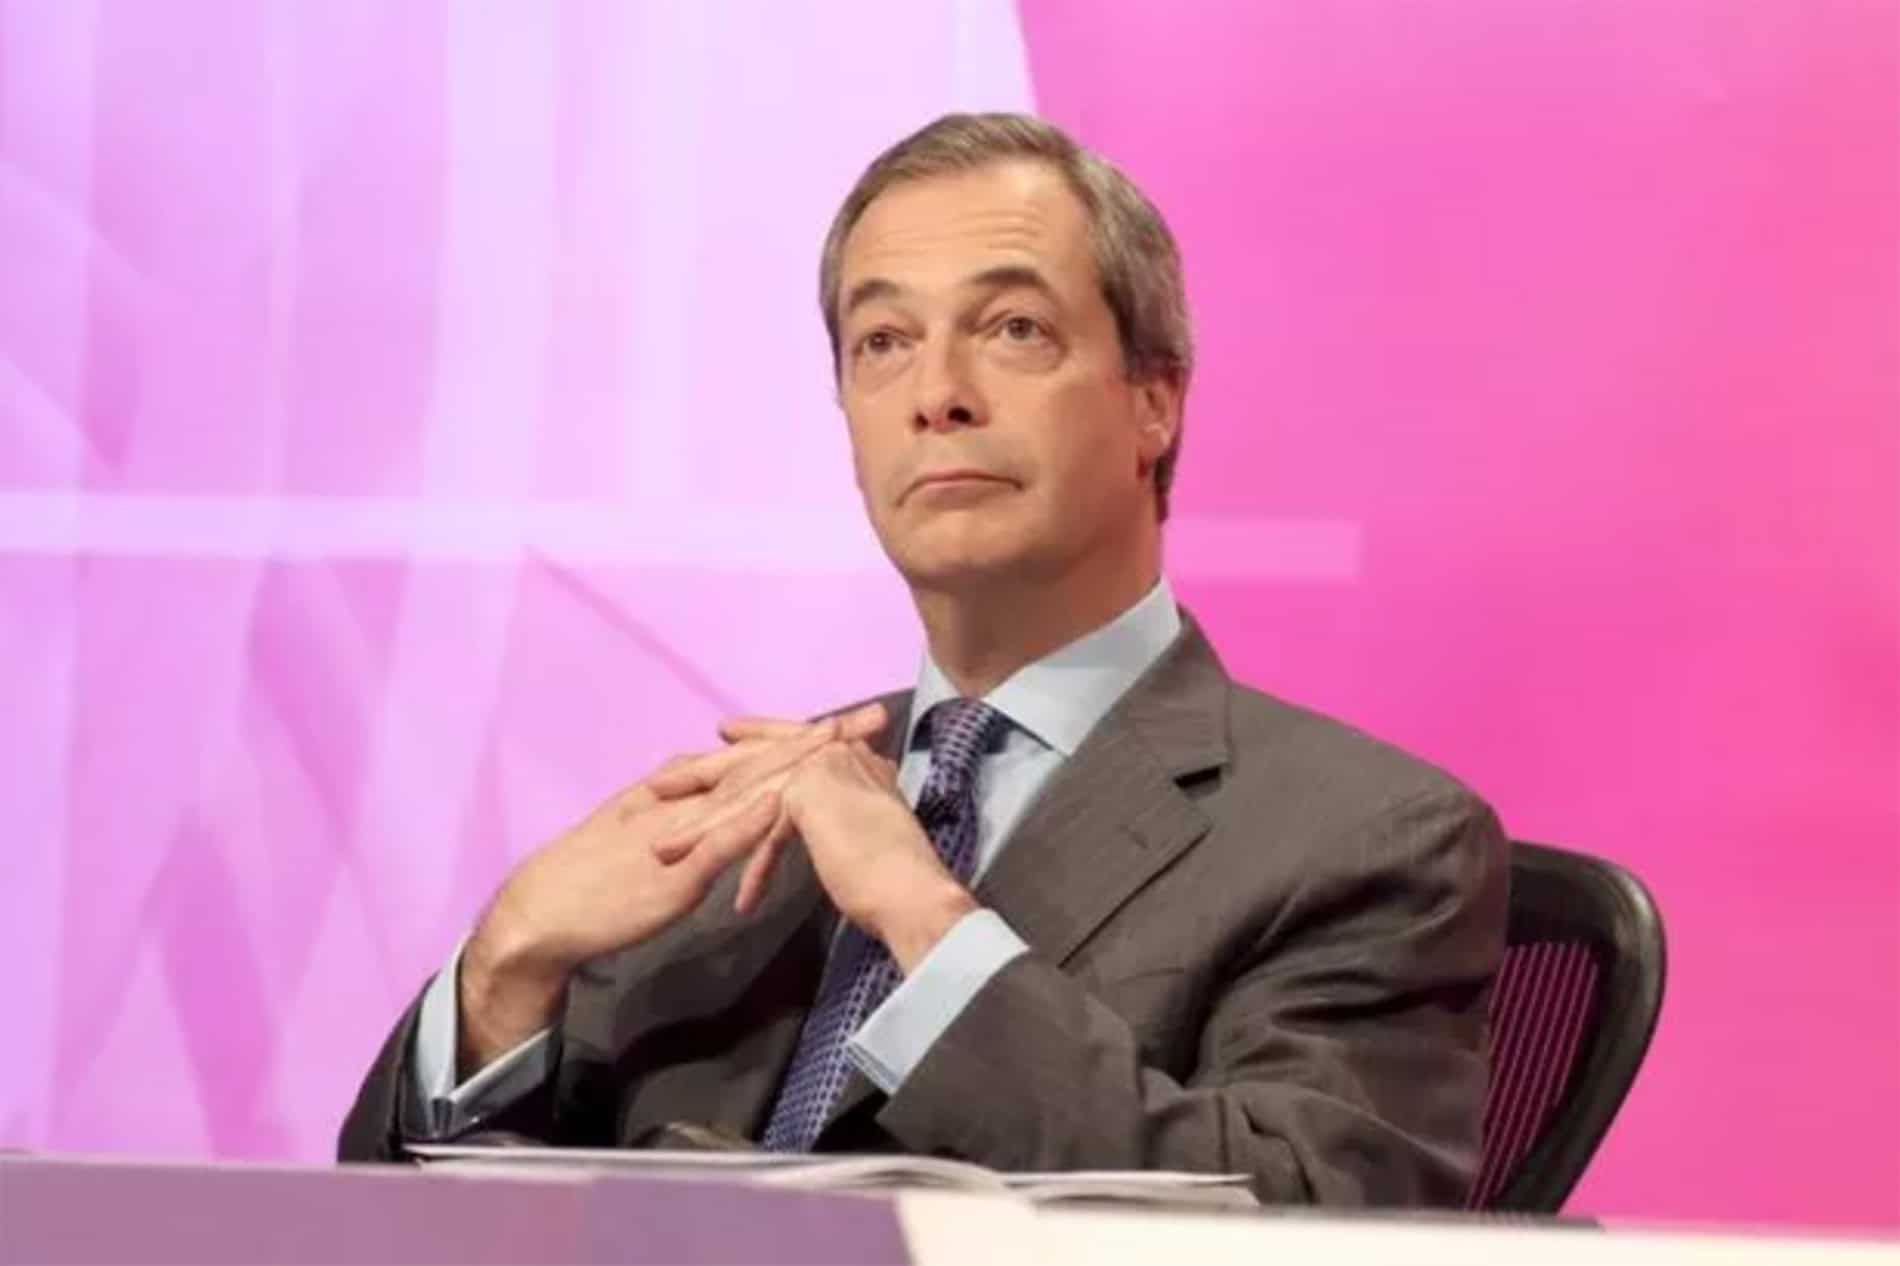 BBC adds Question Time show with Reform after Farage complaints over exclusion